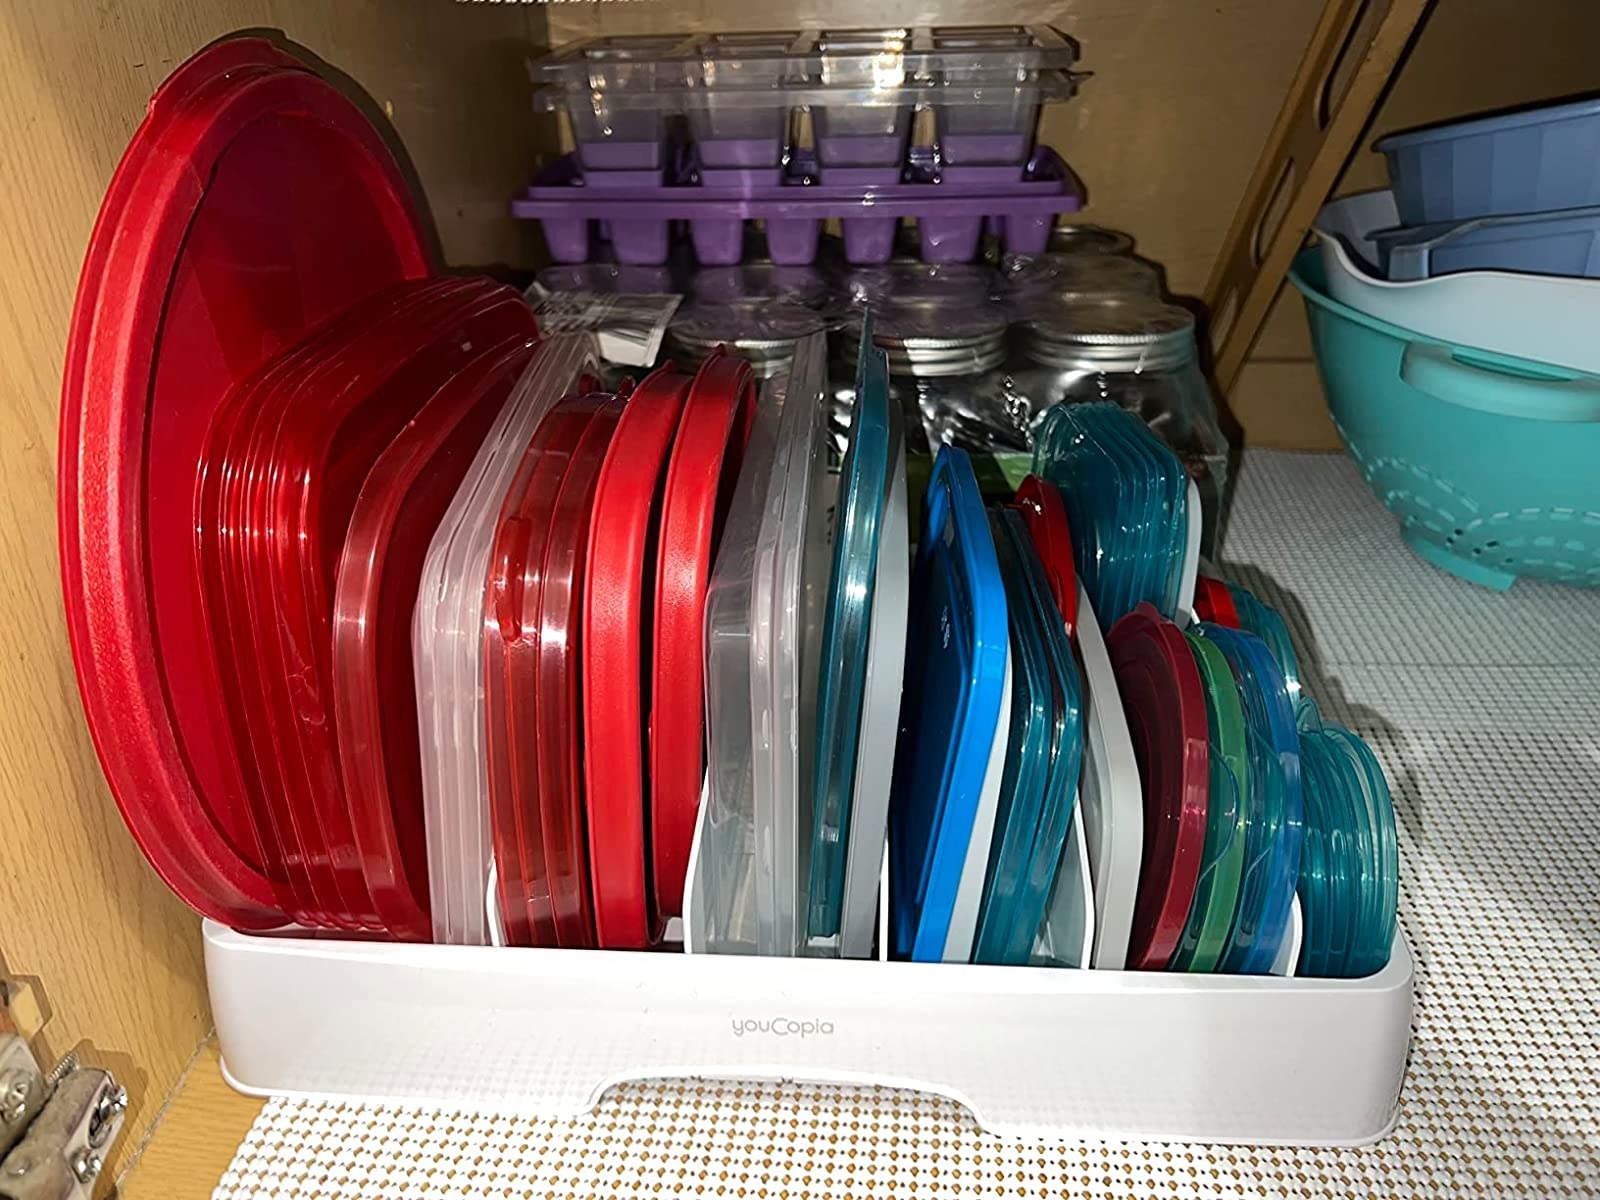 Reviewer image of Tupperware lids in organizer